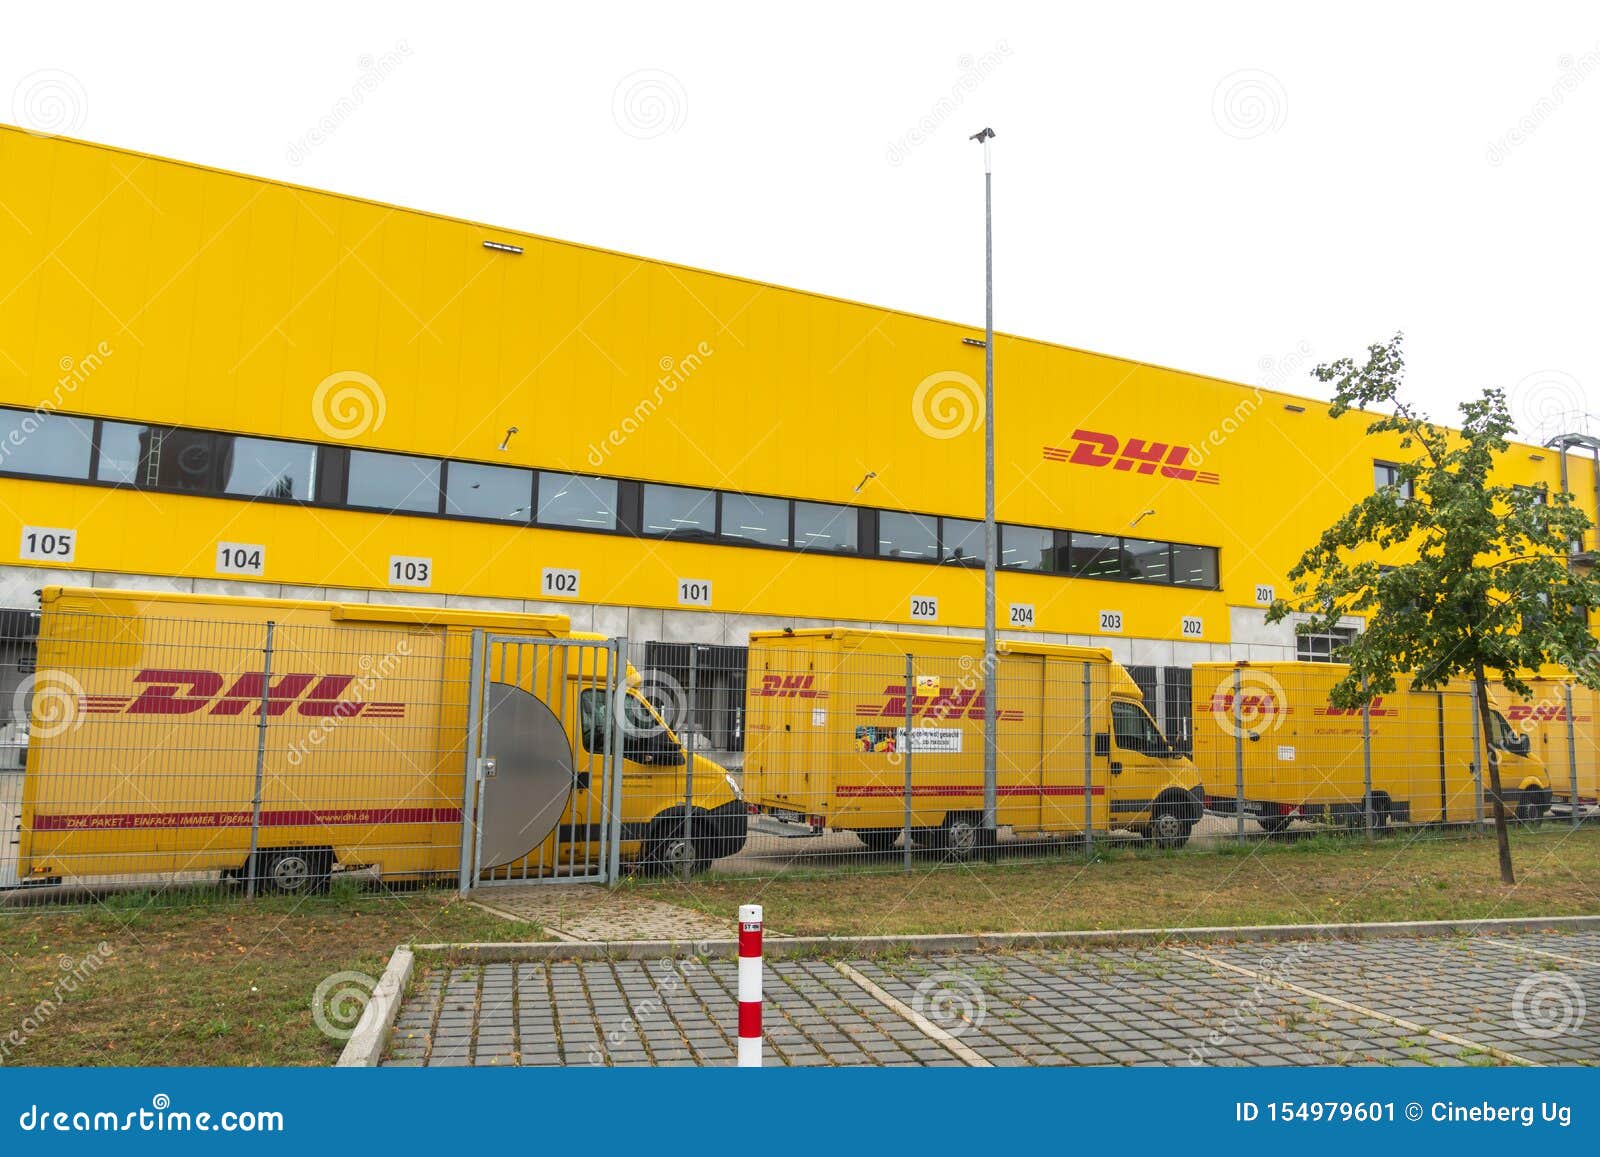 DHL Delivery Point in Berlin, Germany Editorial Photo - Image of emblem ...